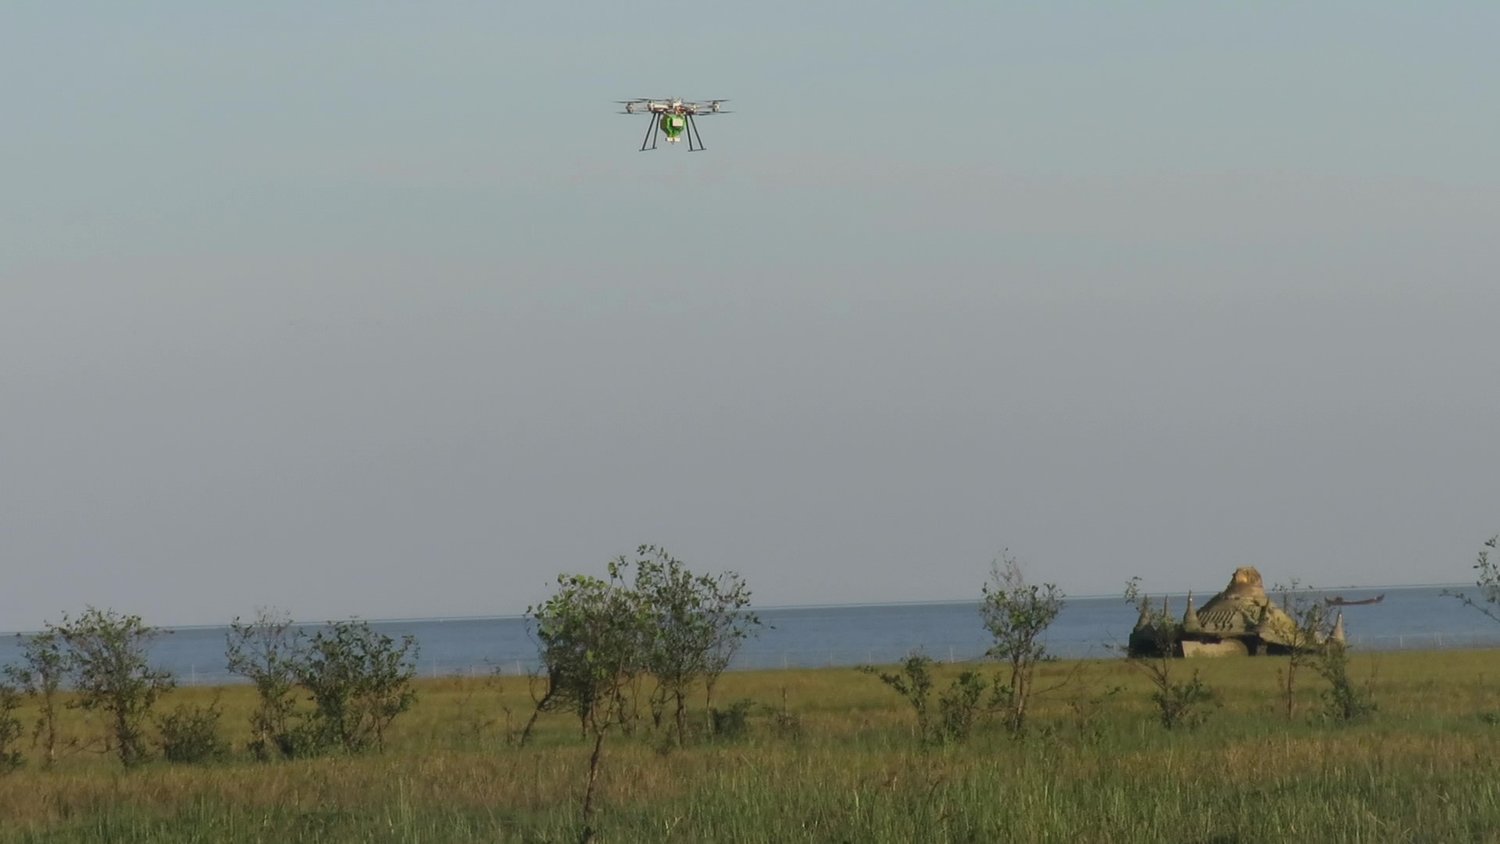 Biocarbon Engineering Receives US$2.5 Million in Seed Investment to Advance Drone Technology for Replanting Ecosystems